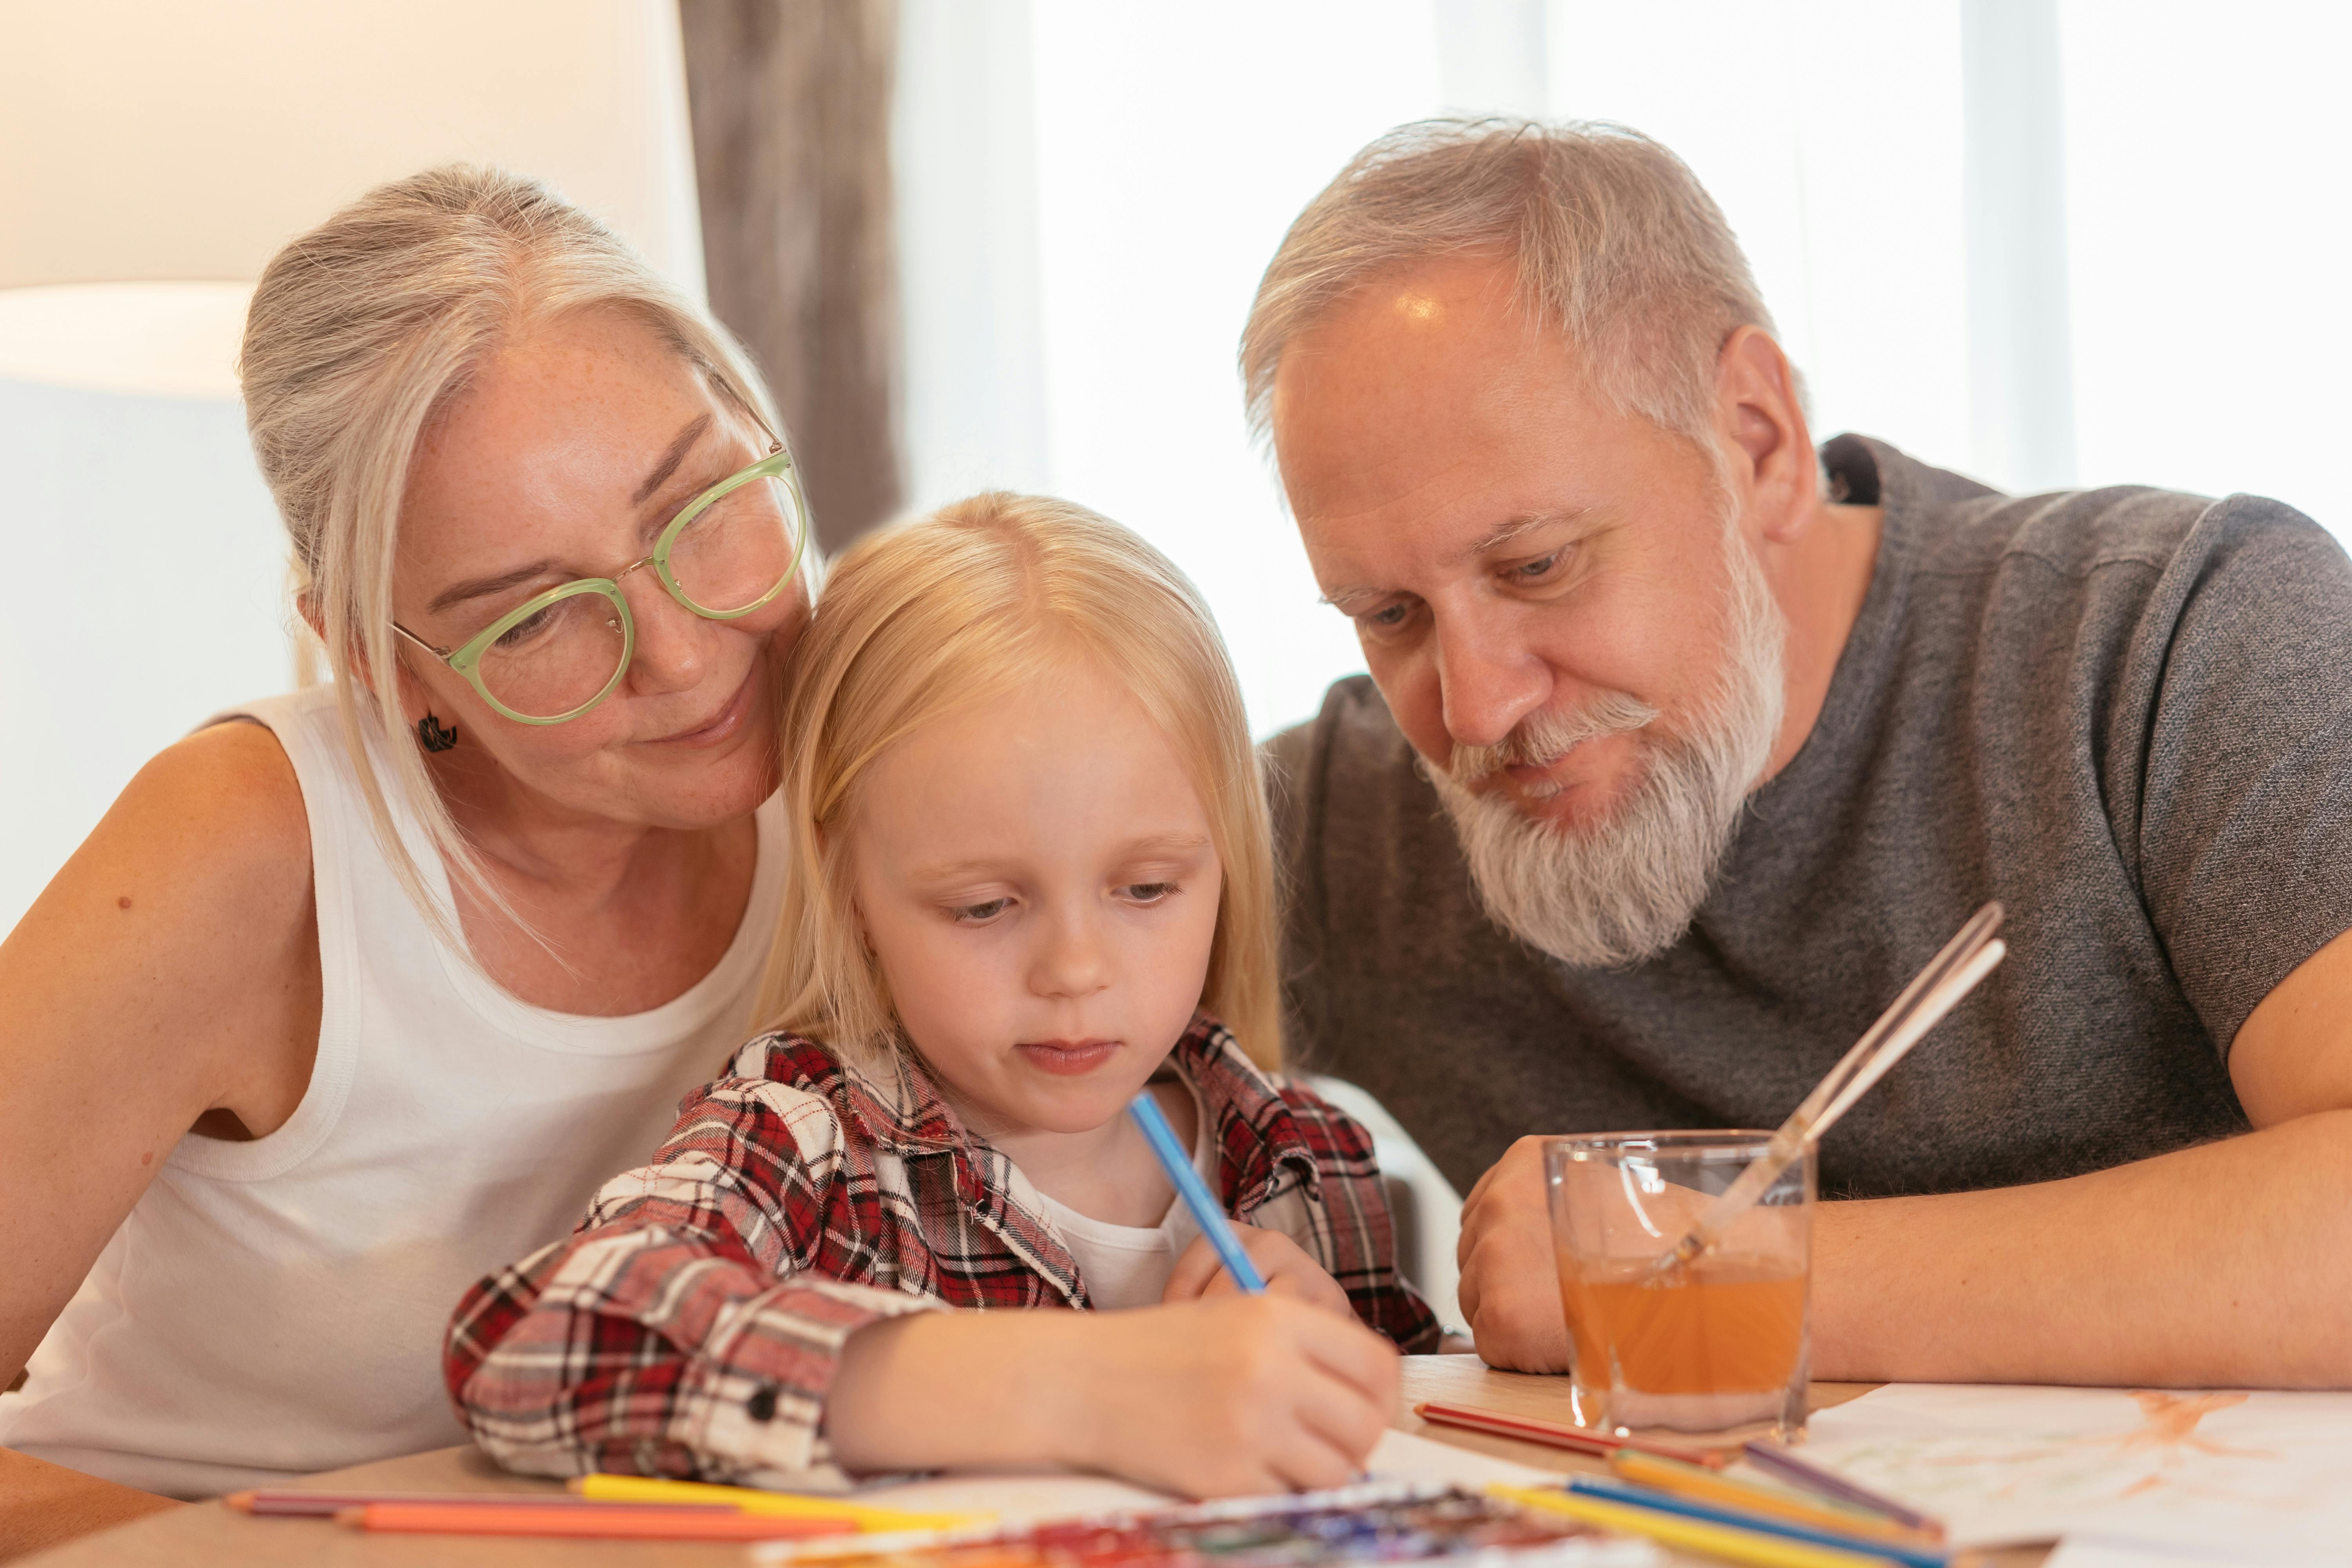 Grandparents playing with their granddaughter | Source: Pexels